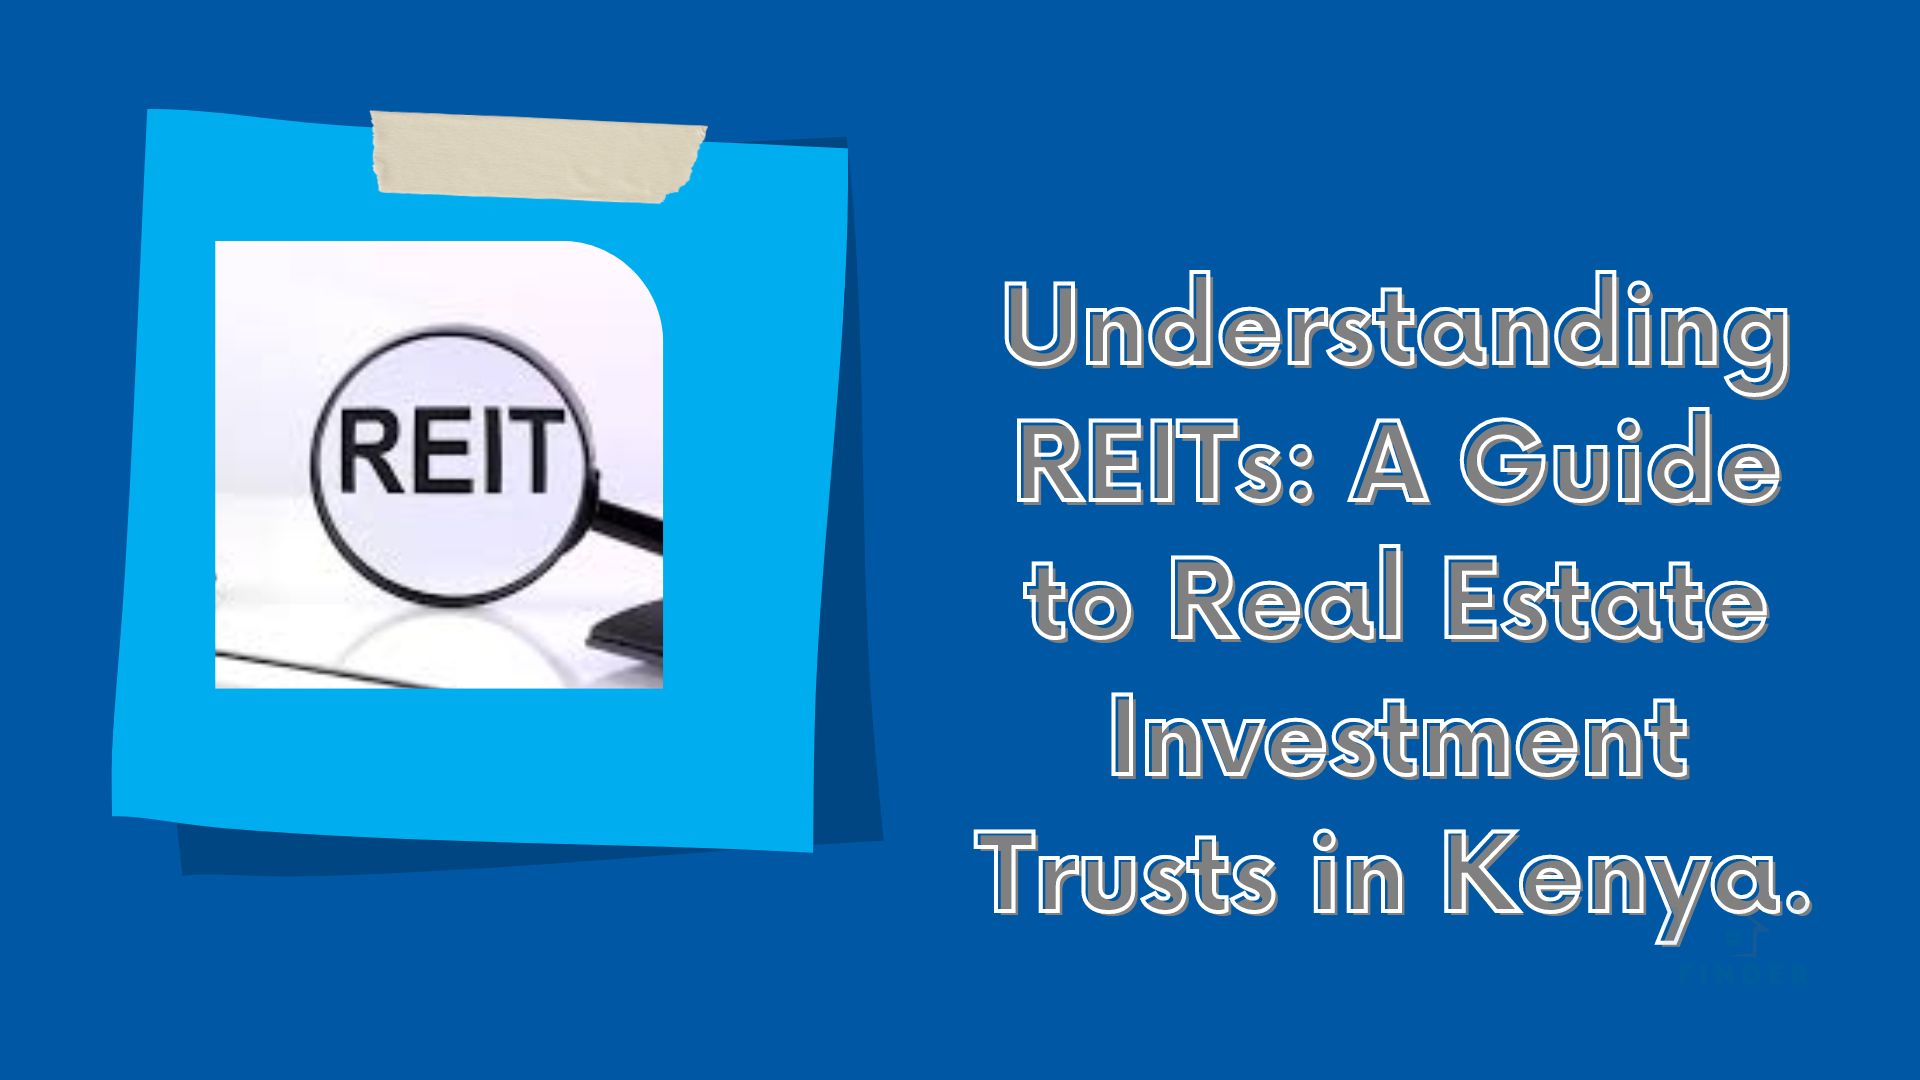 Understanding REITs: A Guide to Real Estate Investment Trusts in Kenya.